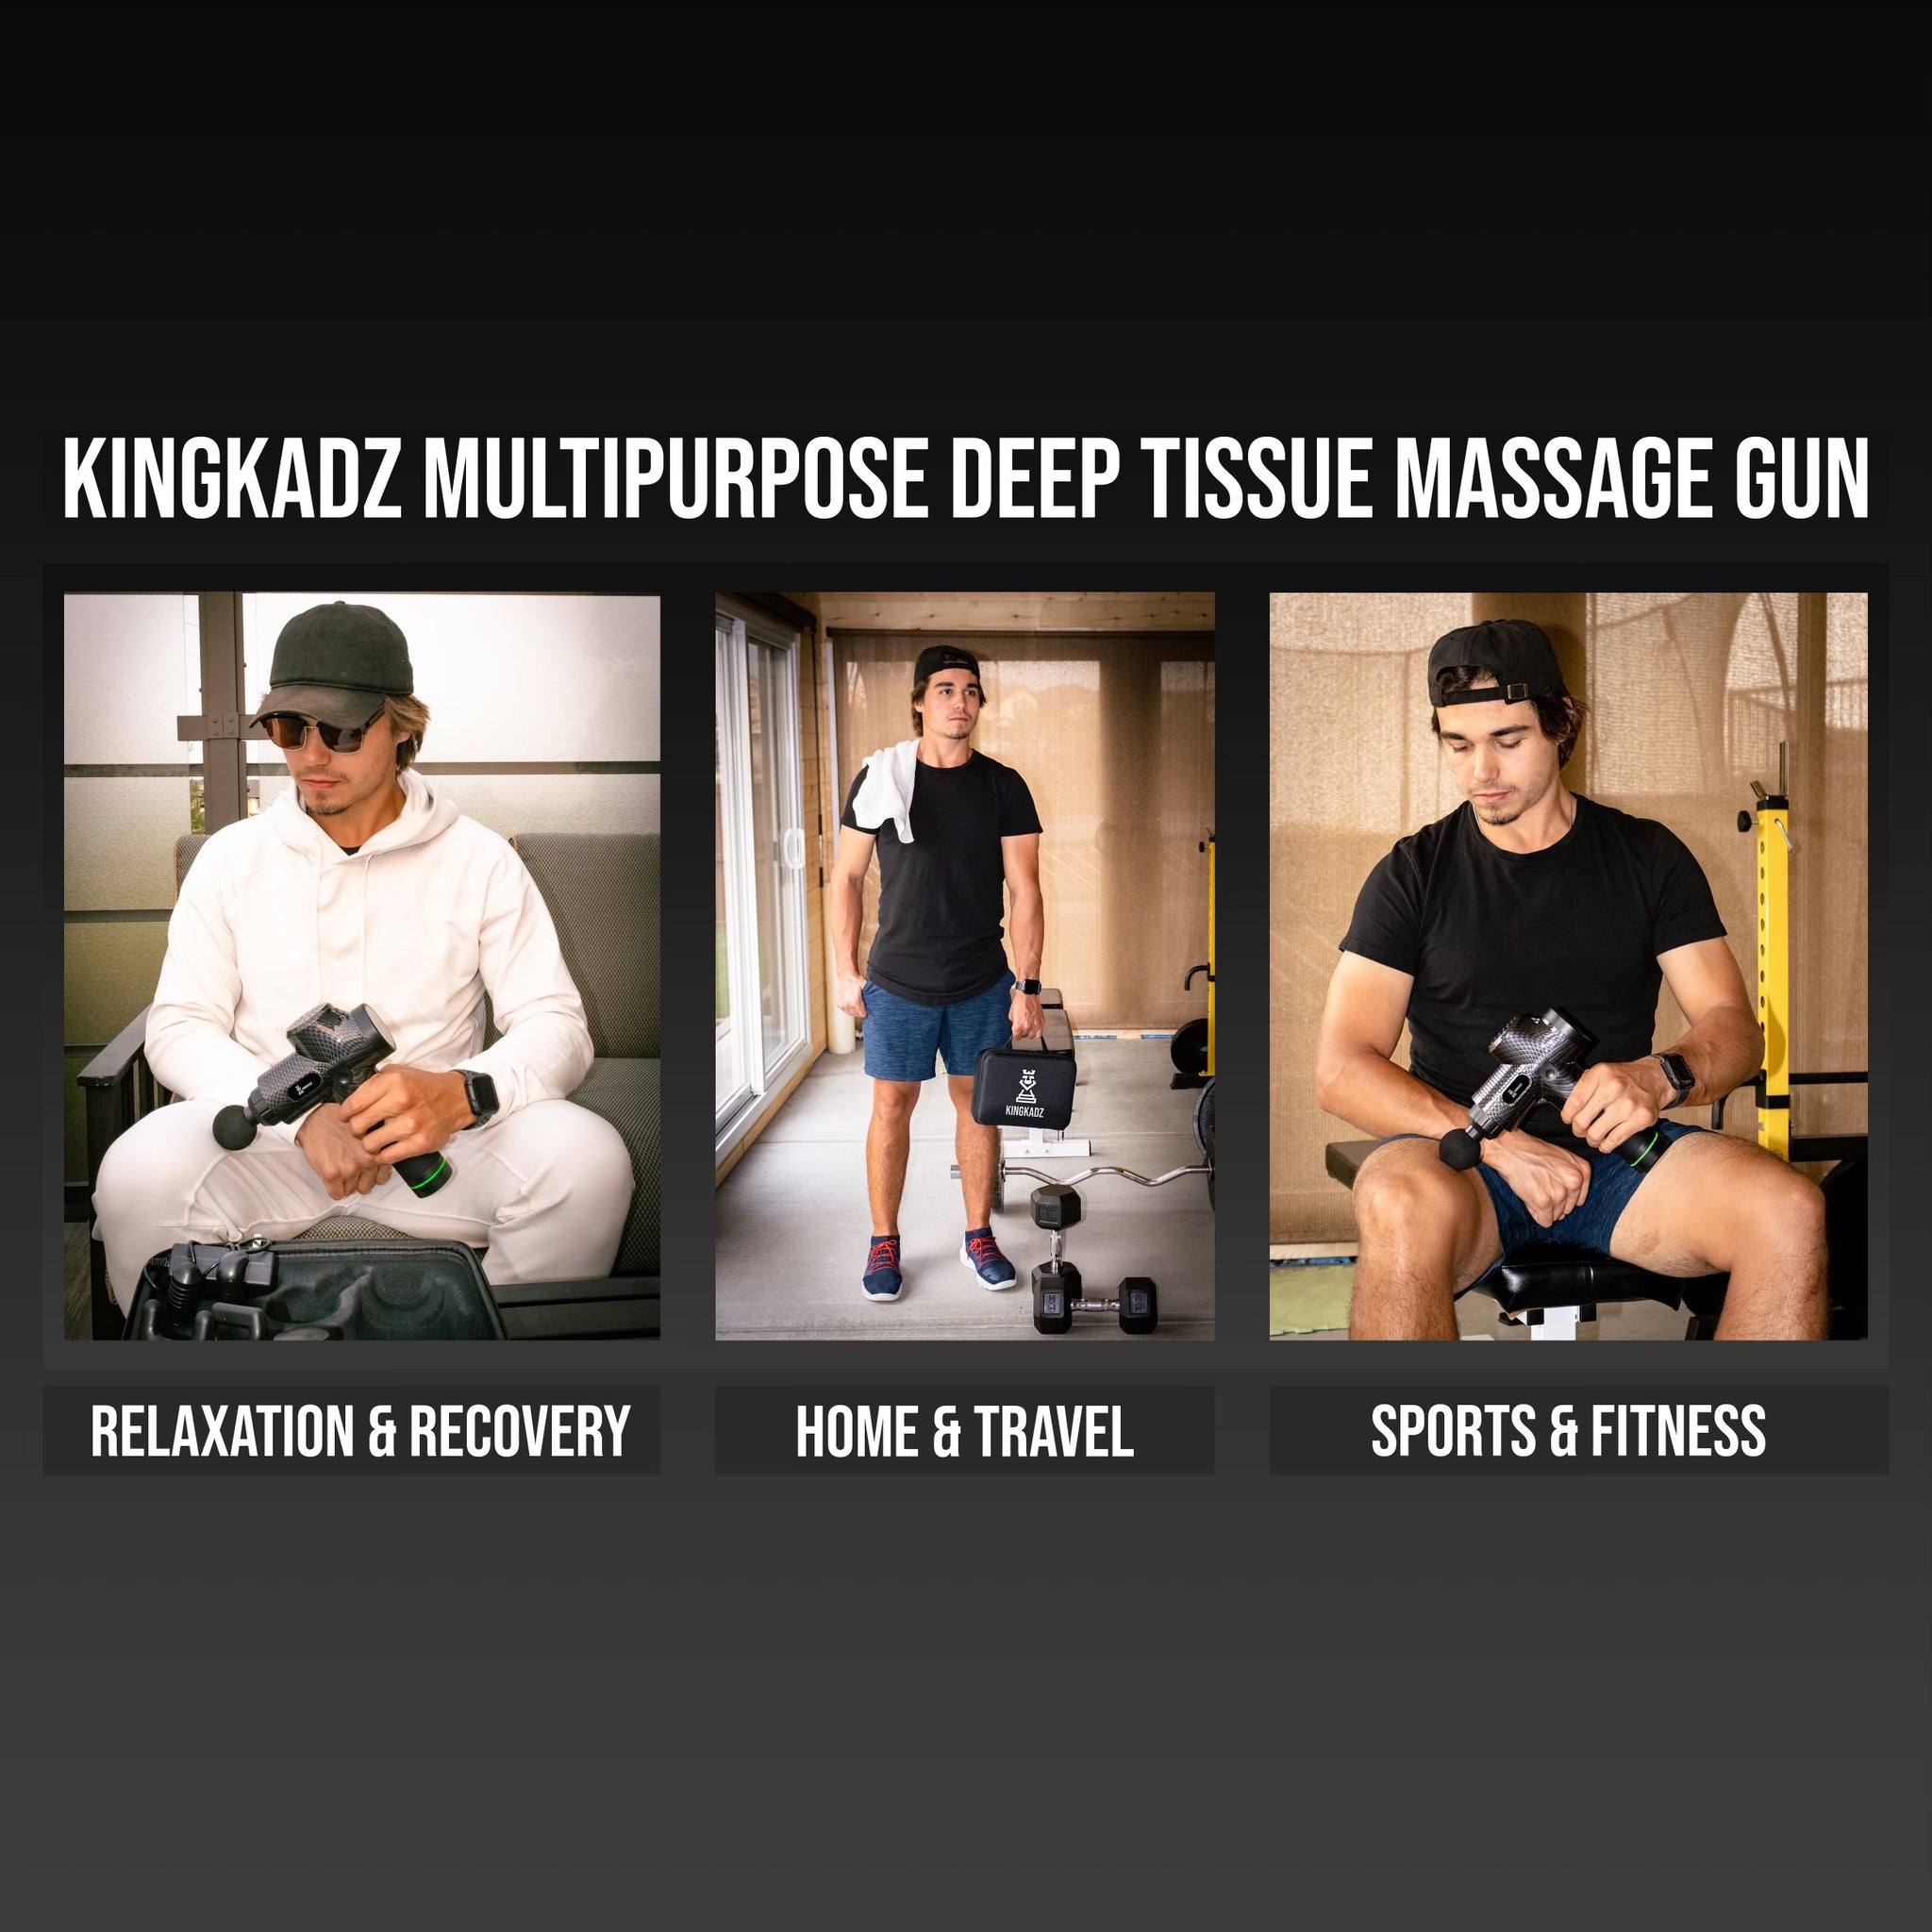 The Ultimate Relaxation Companion: Exploring the Advantages of the KingKadz Massage Gun